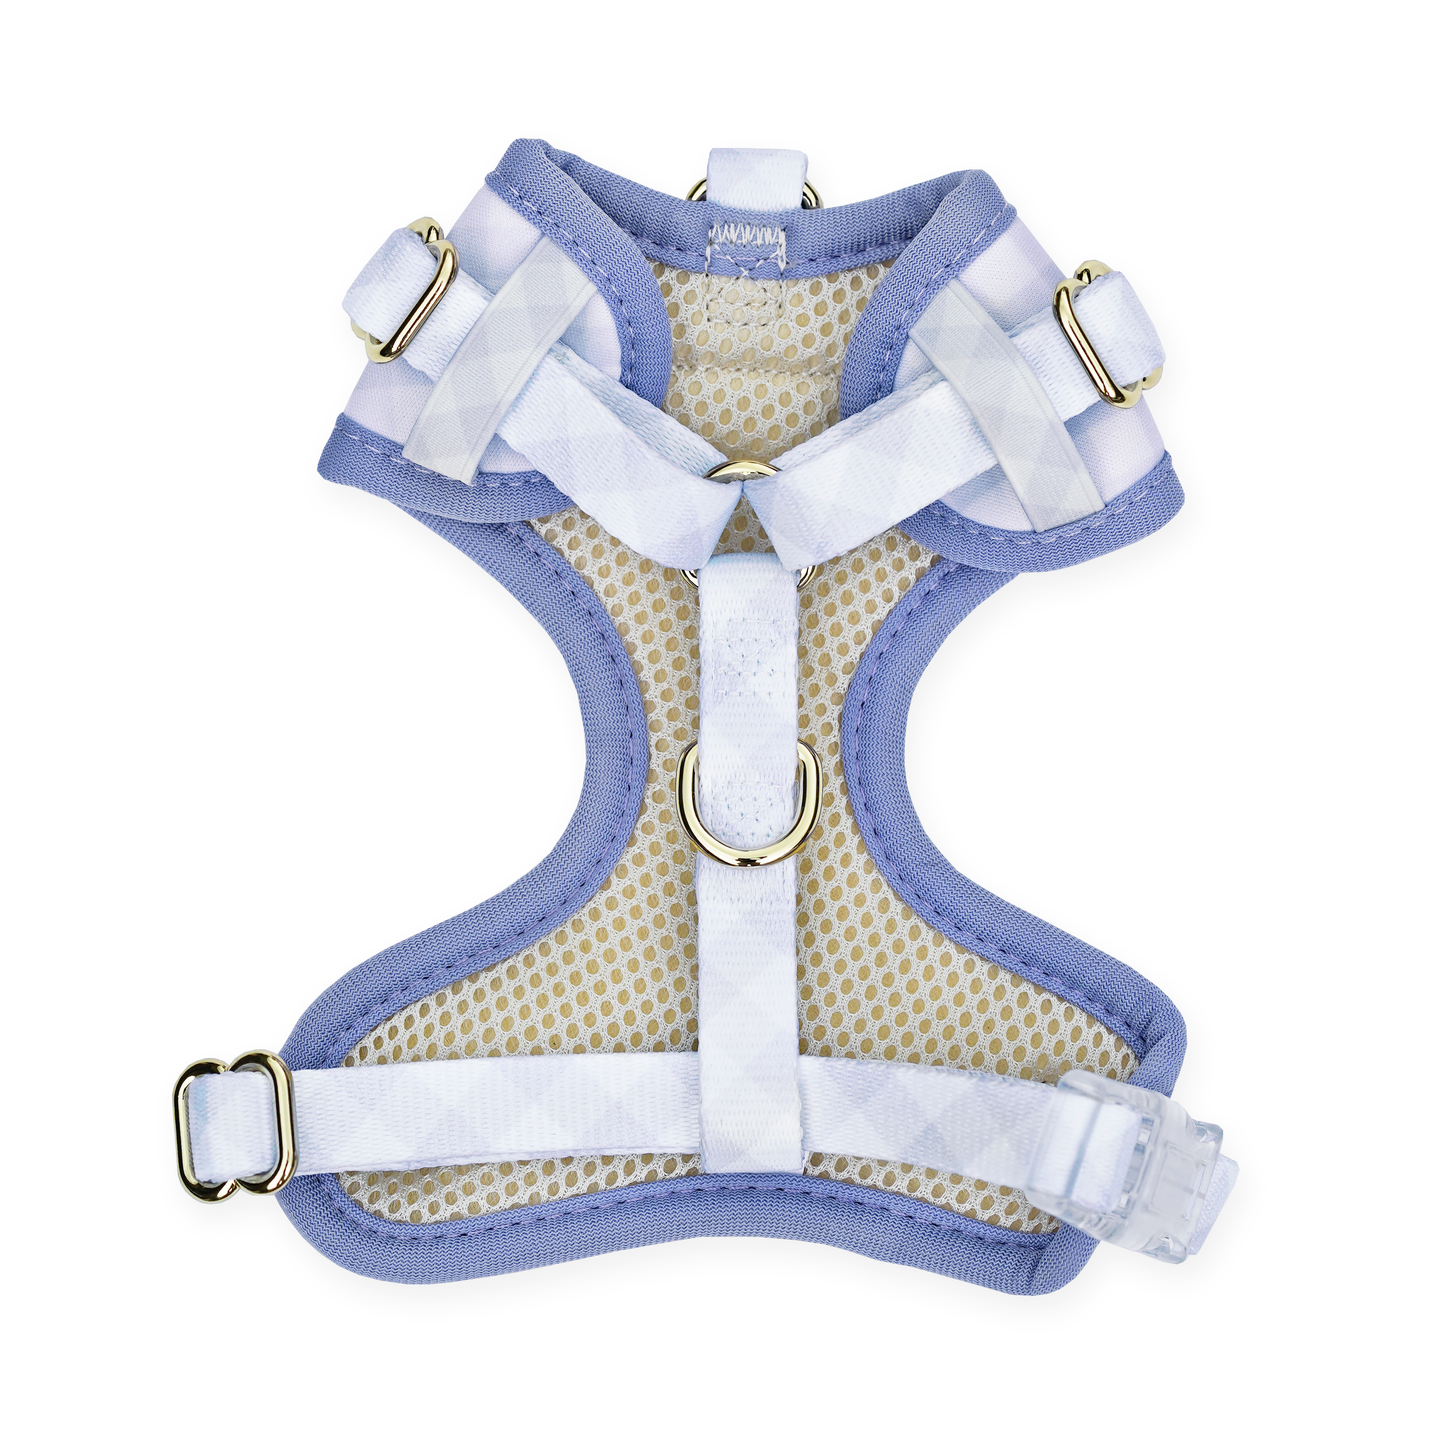 Archie’s Dog Harness